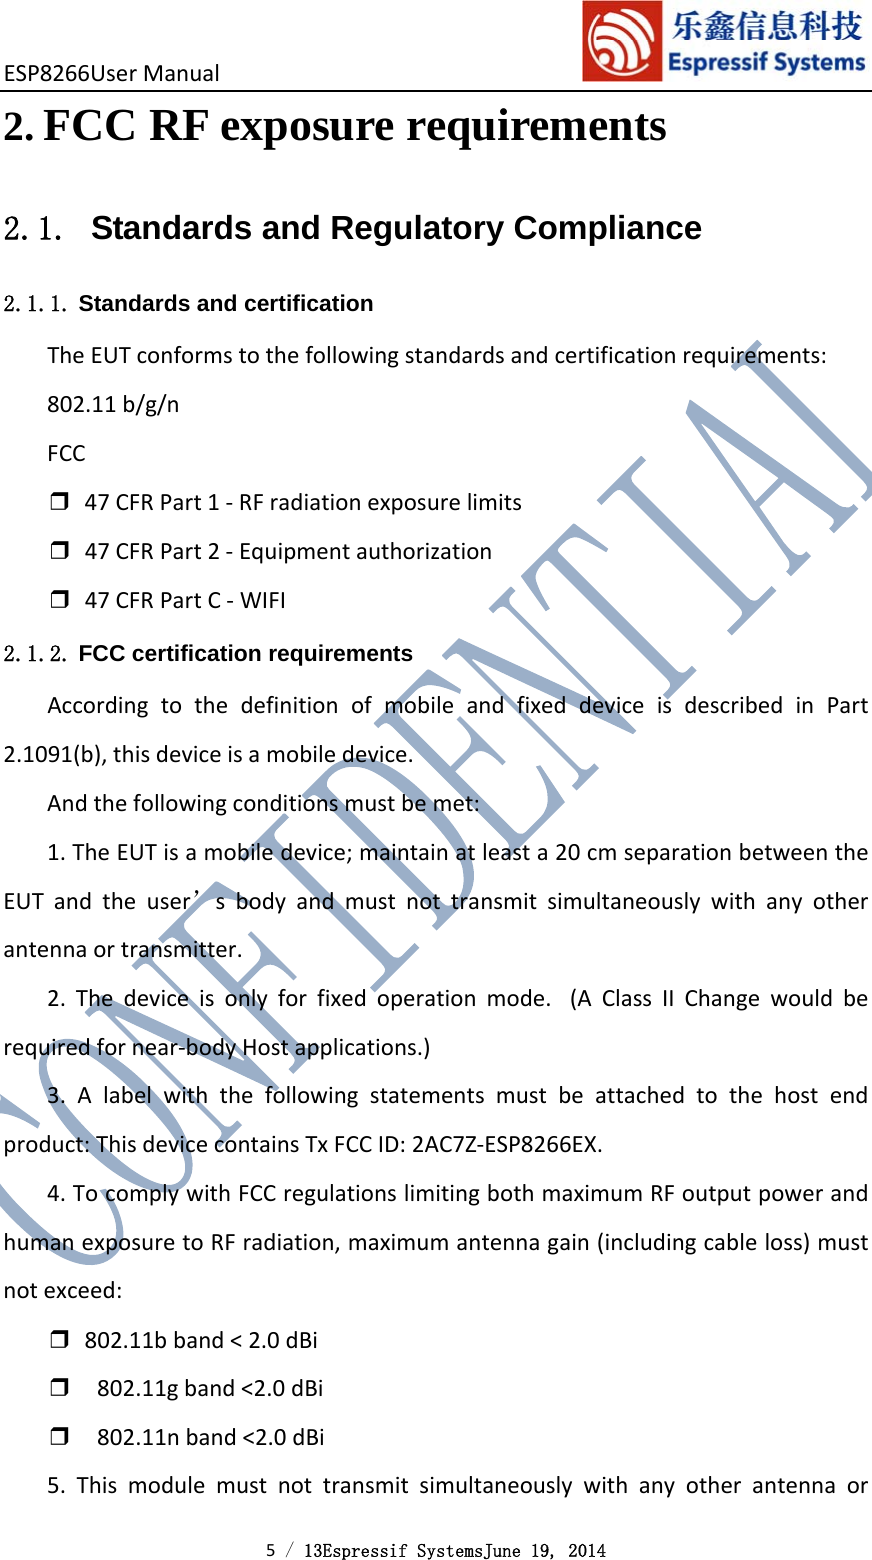 ESP8266UserManual 5 / 13Espressif SystemsJune 19, 2014 2. FCC RF exposure requirements 2.1.  Standards and Regulatory Compliance 2.1.1. Standards and certification TheEUTconformstothefollowingstandardsandcertificationrequirements:802.11b/g/nFCC❒47CFRPart1‐RFradiationexposurelimits❒47CFRPart2‐Equipmentauthorization❒47CFRPartC‐WIFI2.1.2. FCC certification requirements AccordingtothedefinitionofmobileandfixeddeviceisdescribedinPart2.1091(b),thisdeviceisamobiledevice.Andthefollowingconditionsmustbemet:1.TheEUTisamobiledevice;maintainatleasta20cmseparationbetweentheEUTandtheuser’sbodyandmustnottransmitsimultaneouslywithanyotherantennaortransmitter.2.Thedeviceisonlyforfixedoperationmode. (AClassIIChangewouldberequiredfornear‐bodyHostapplications.)3.Alabelwiththefollowingstatementsmustbeattachedtothehostendproduct:ThisdevicecontainsTxFCCID:2AC7Z‐ESP8266EX.4.TocomplywithFCCregulationslimitingbothmaximumRFoutputpowerandhumanexposuretoRFradiation,maximumantennagain(includingcableloss)mustnotexceed:❒802.11bband&lt;2.0dBi❒802.11gband&lt;2.0dBi❒802.11nband&lt;2.0dBi5.Thismodulemustnottransmitsimultaneouslywithanyotherantennaor